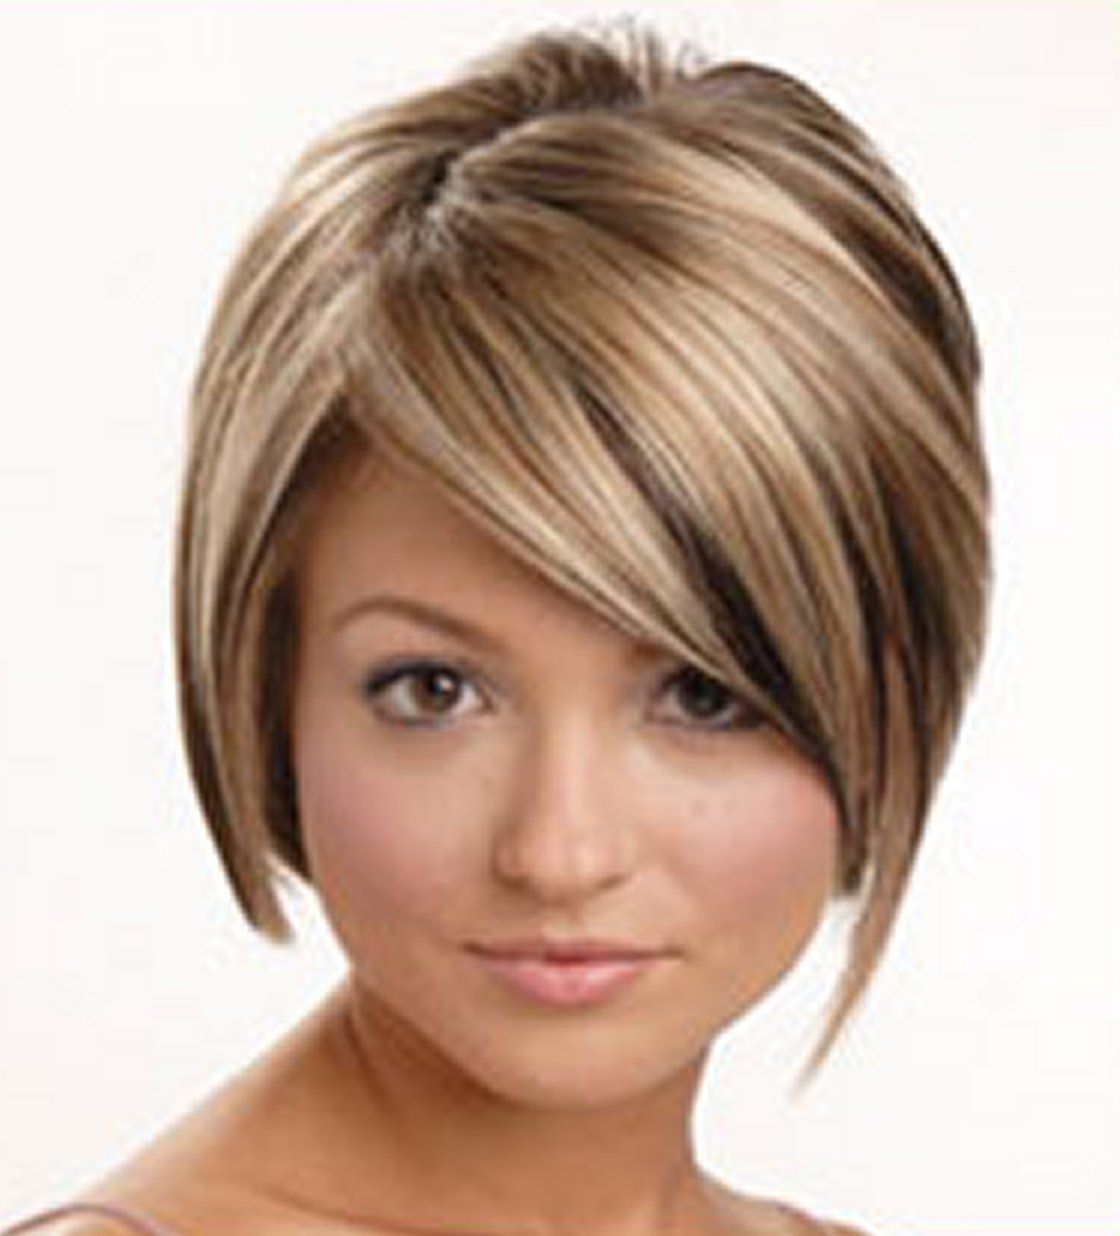 Cool Short Edgy Hairstyle Wallpaper ~ Global Hairstyles Regarding Short Edgy Girl Haircuts (View 16 of 26)